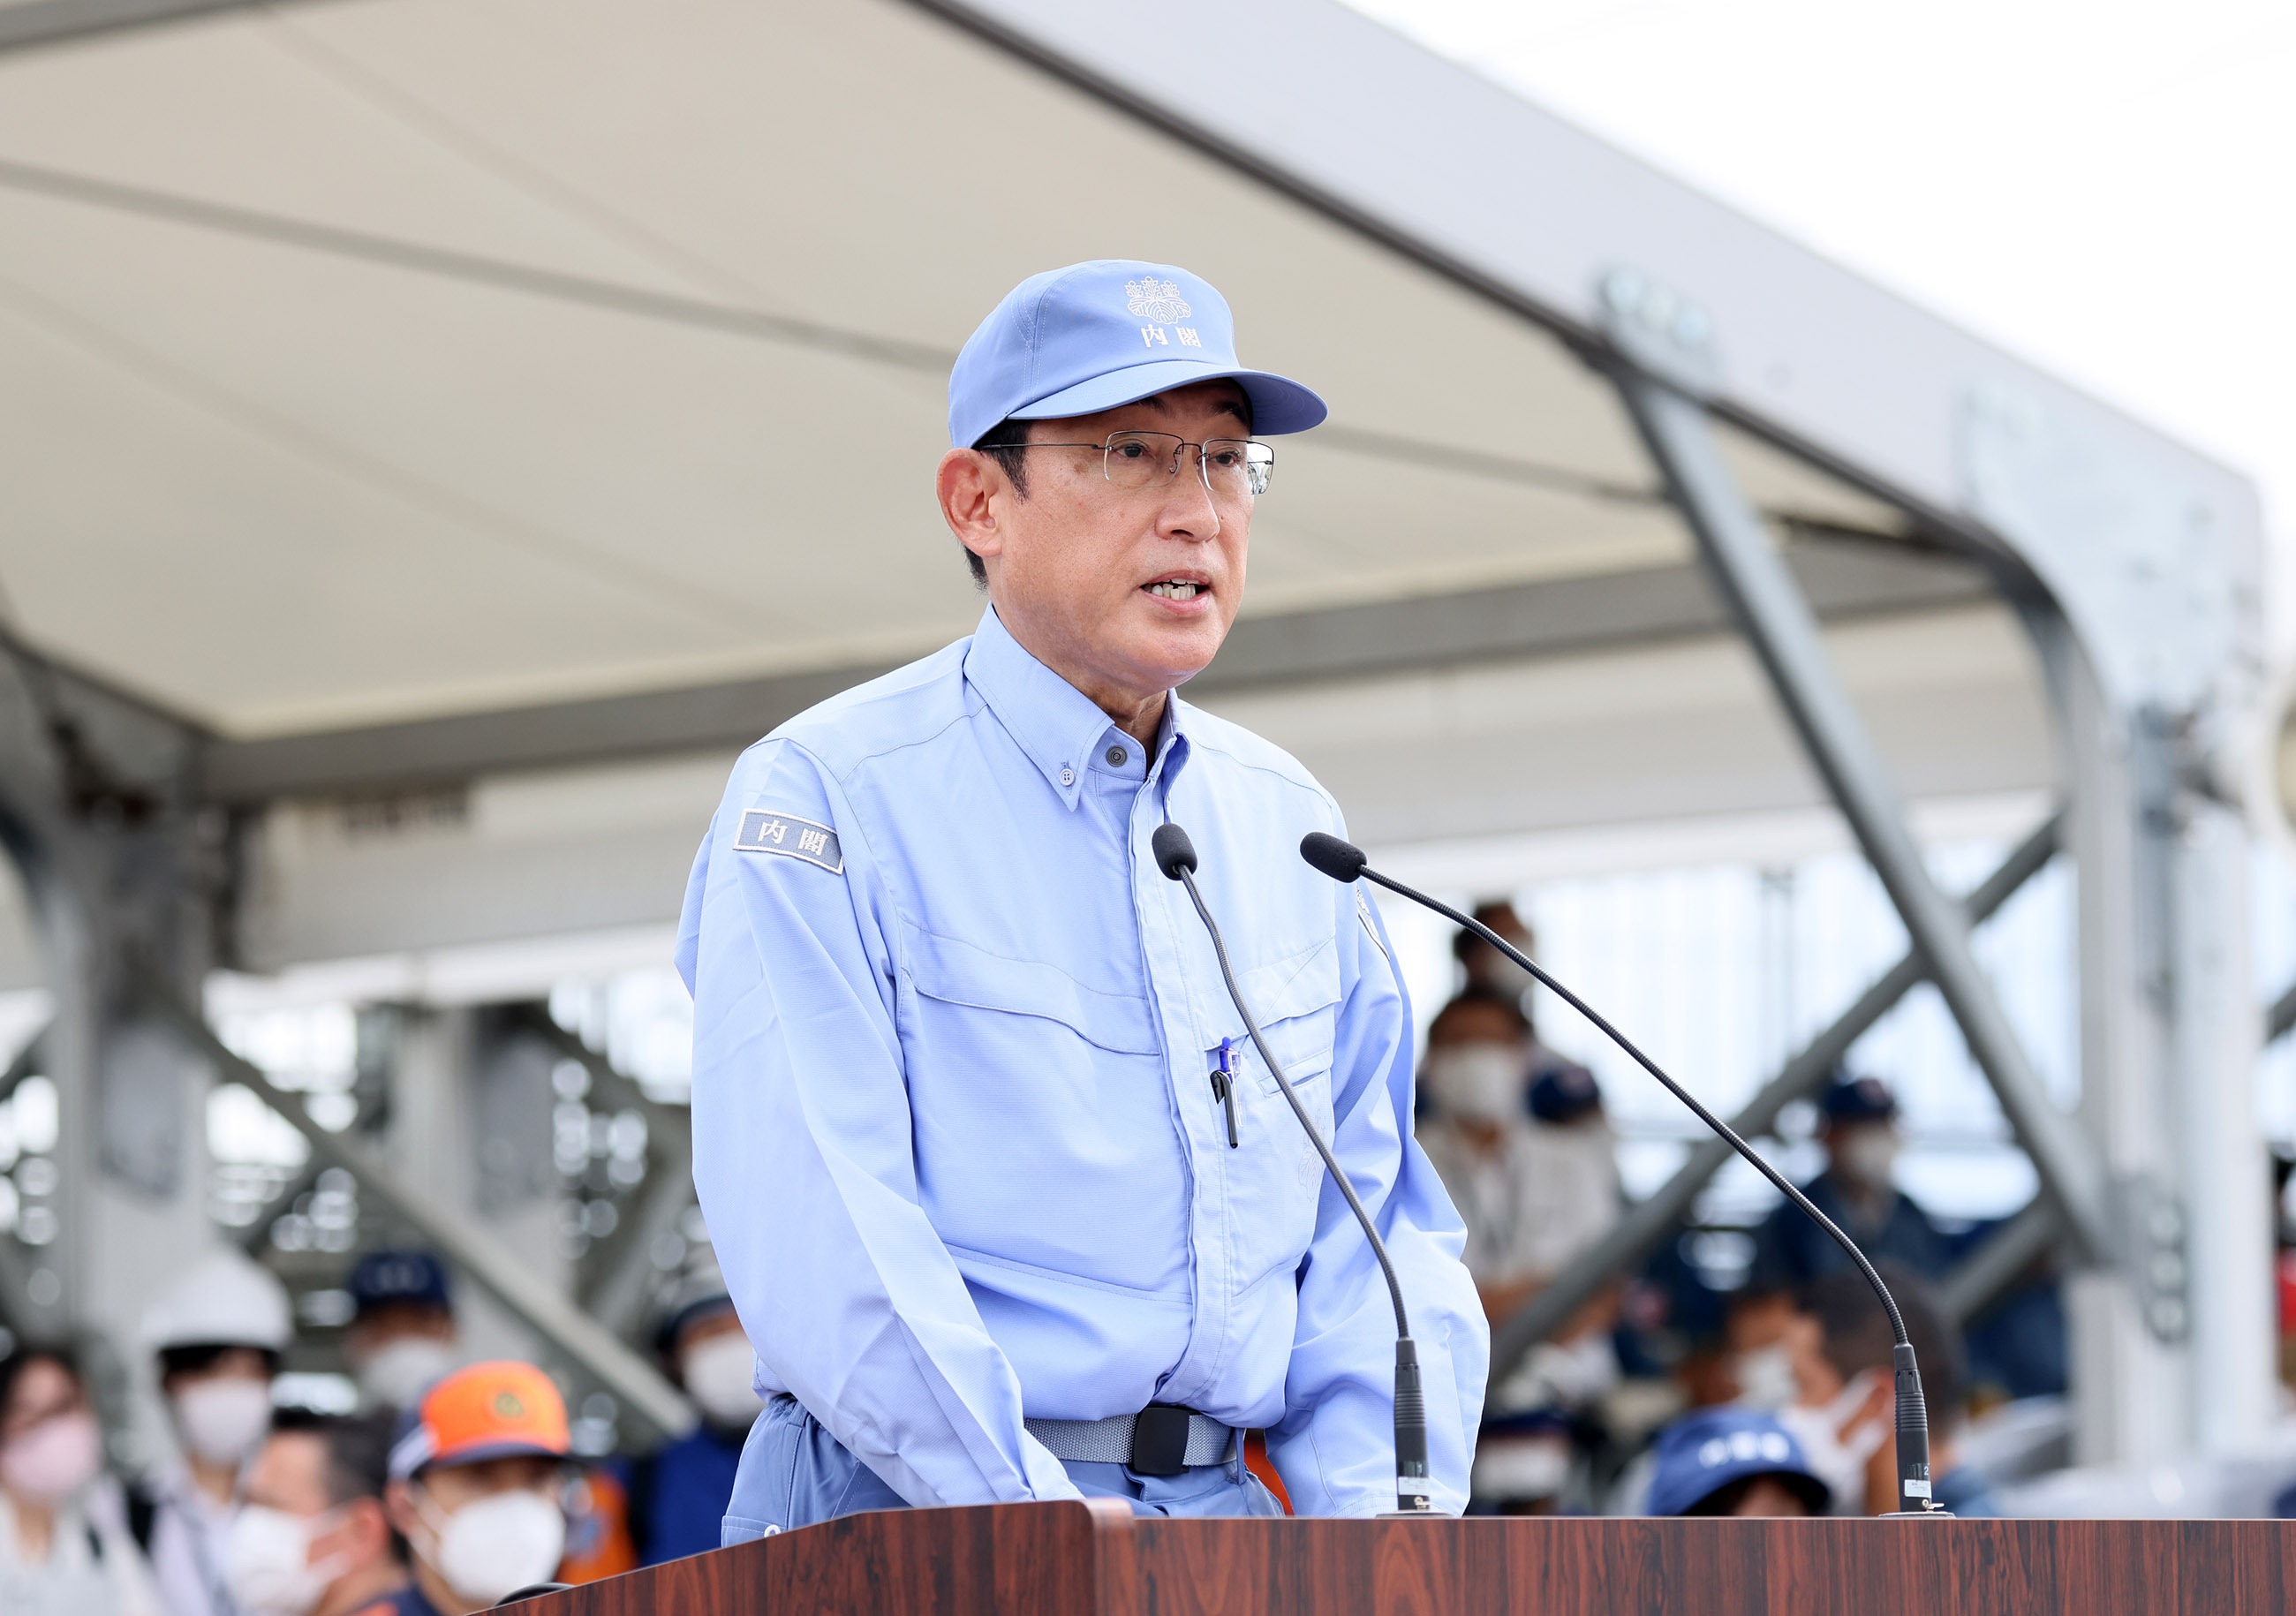 Photograph of the Prime Minister delivering an address during the joint disaster management drills by nine local governments in the Kanto region (1)